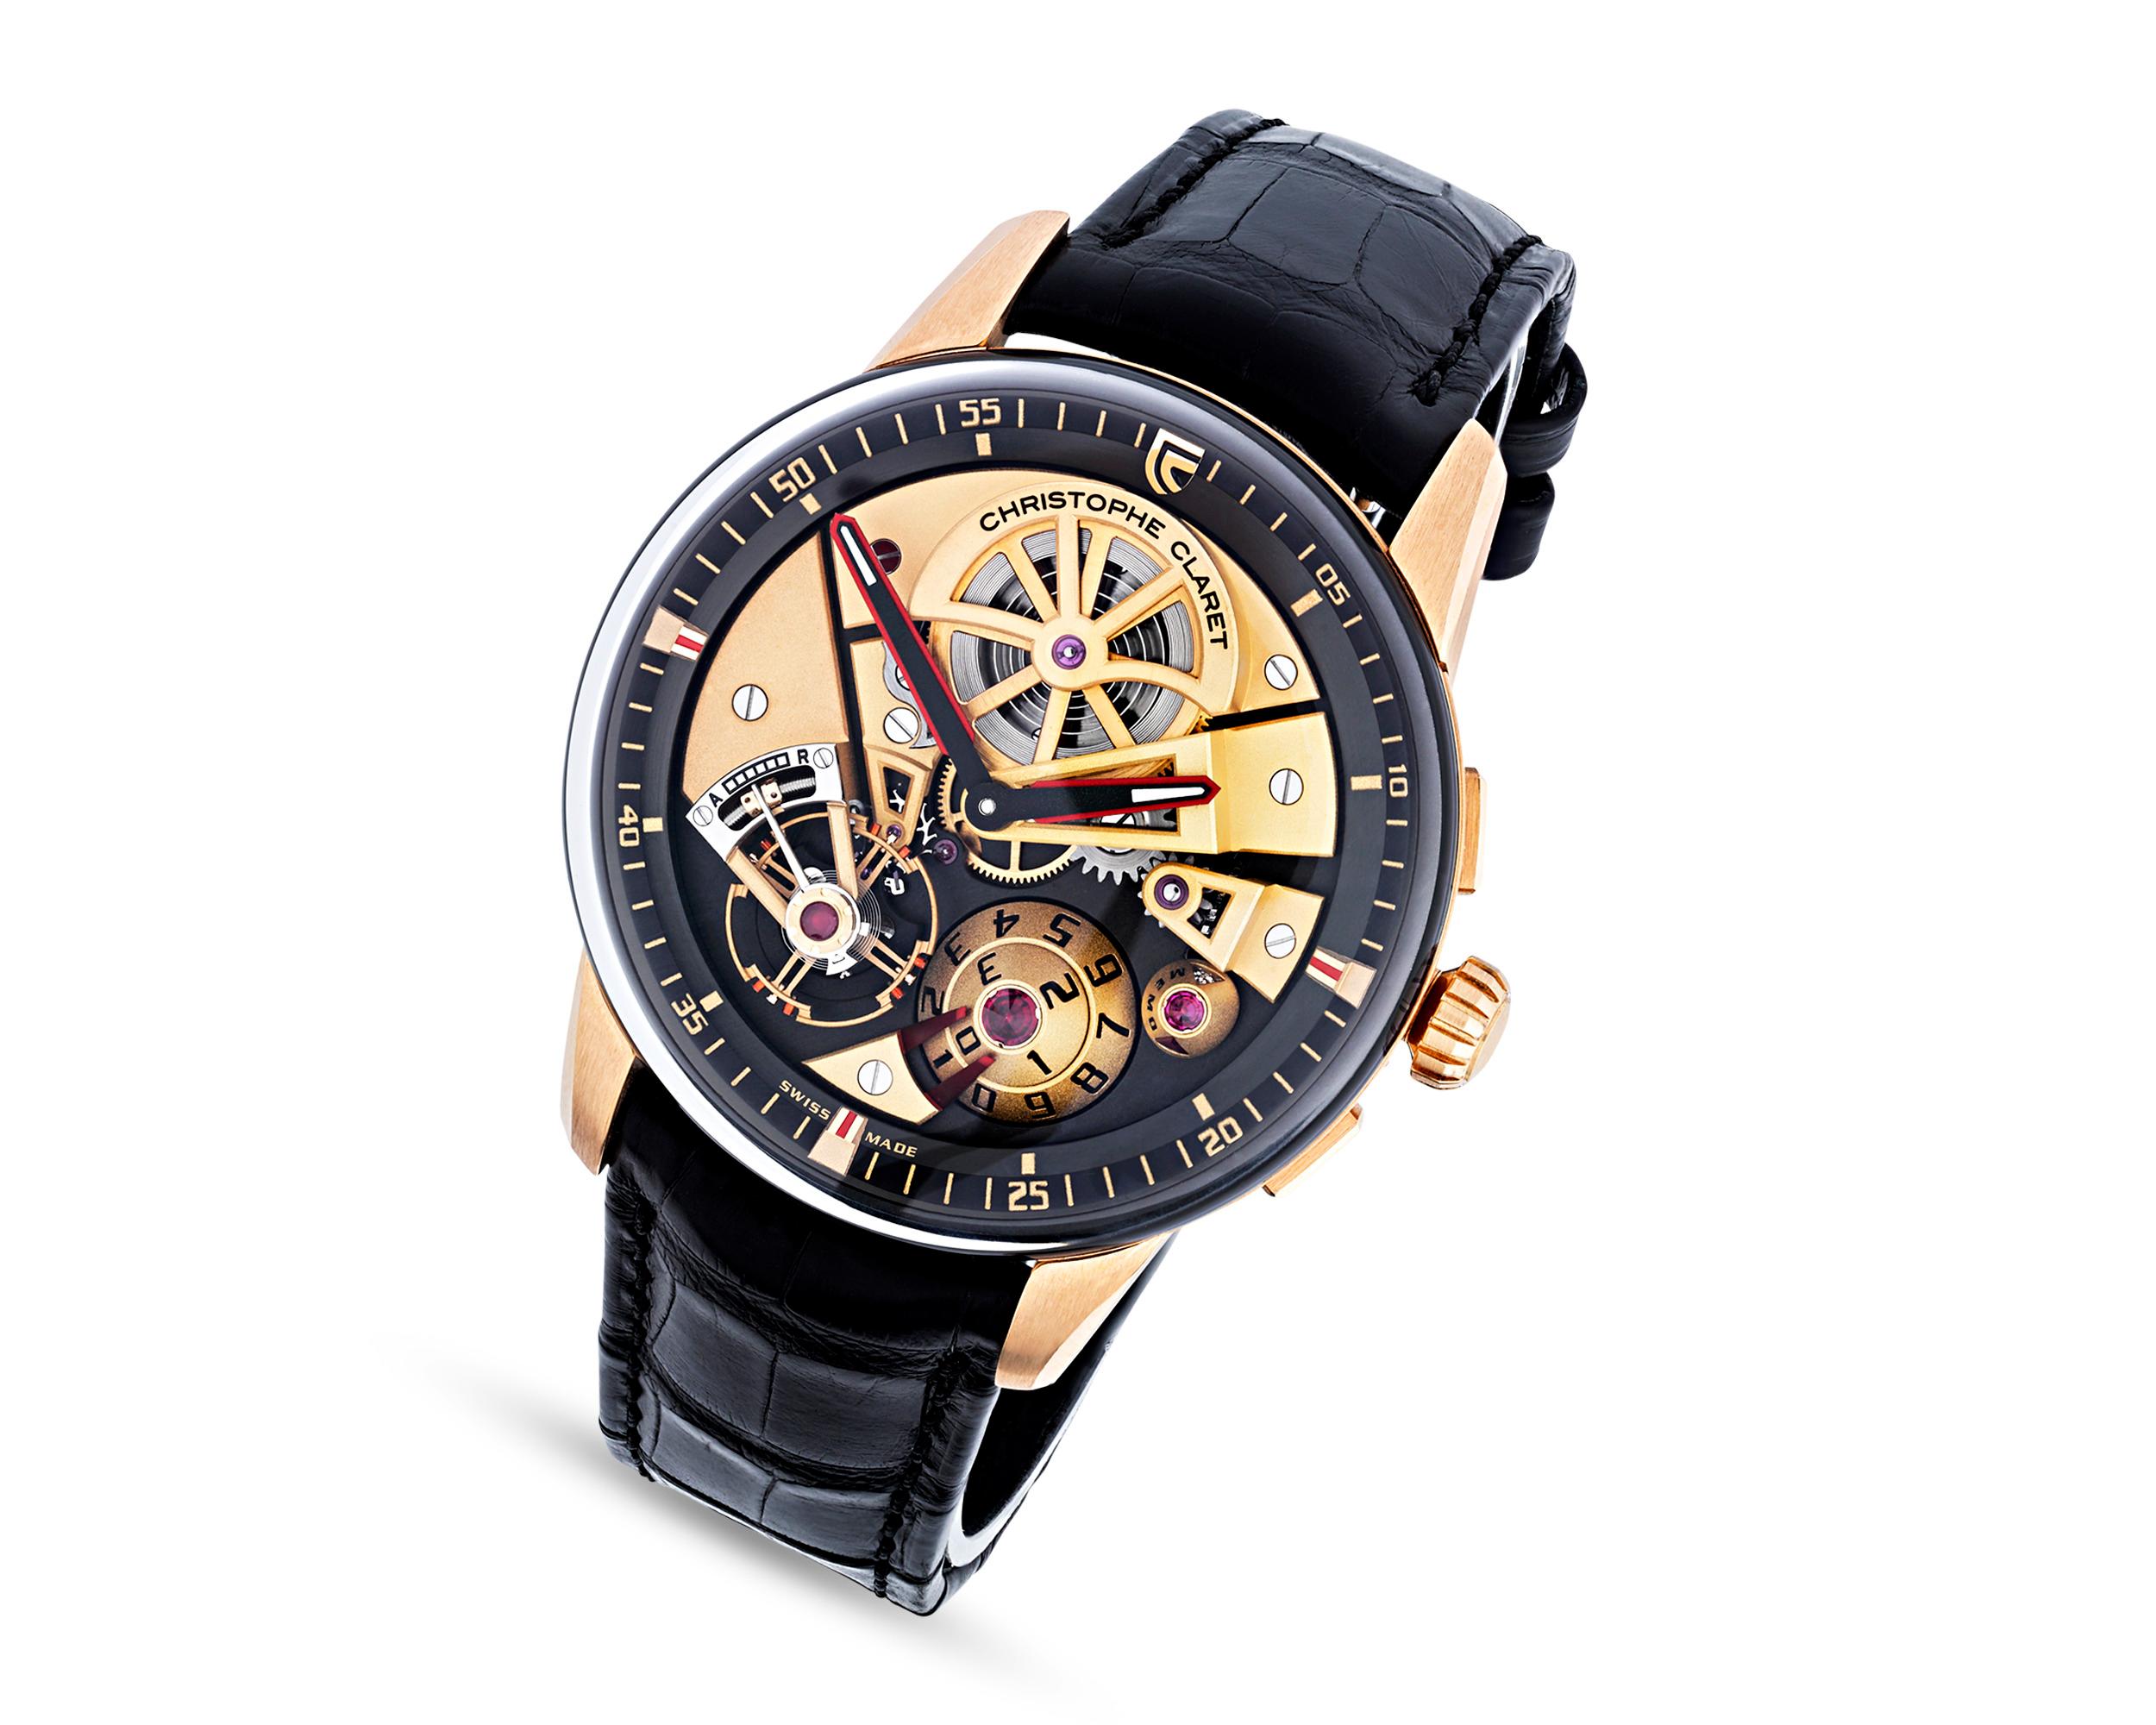 Modern Maestro Limited Edition Watch by Christophe Claret